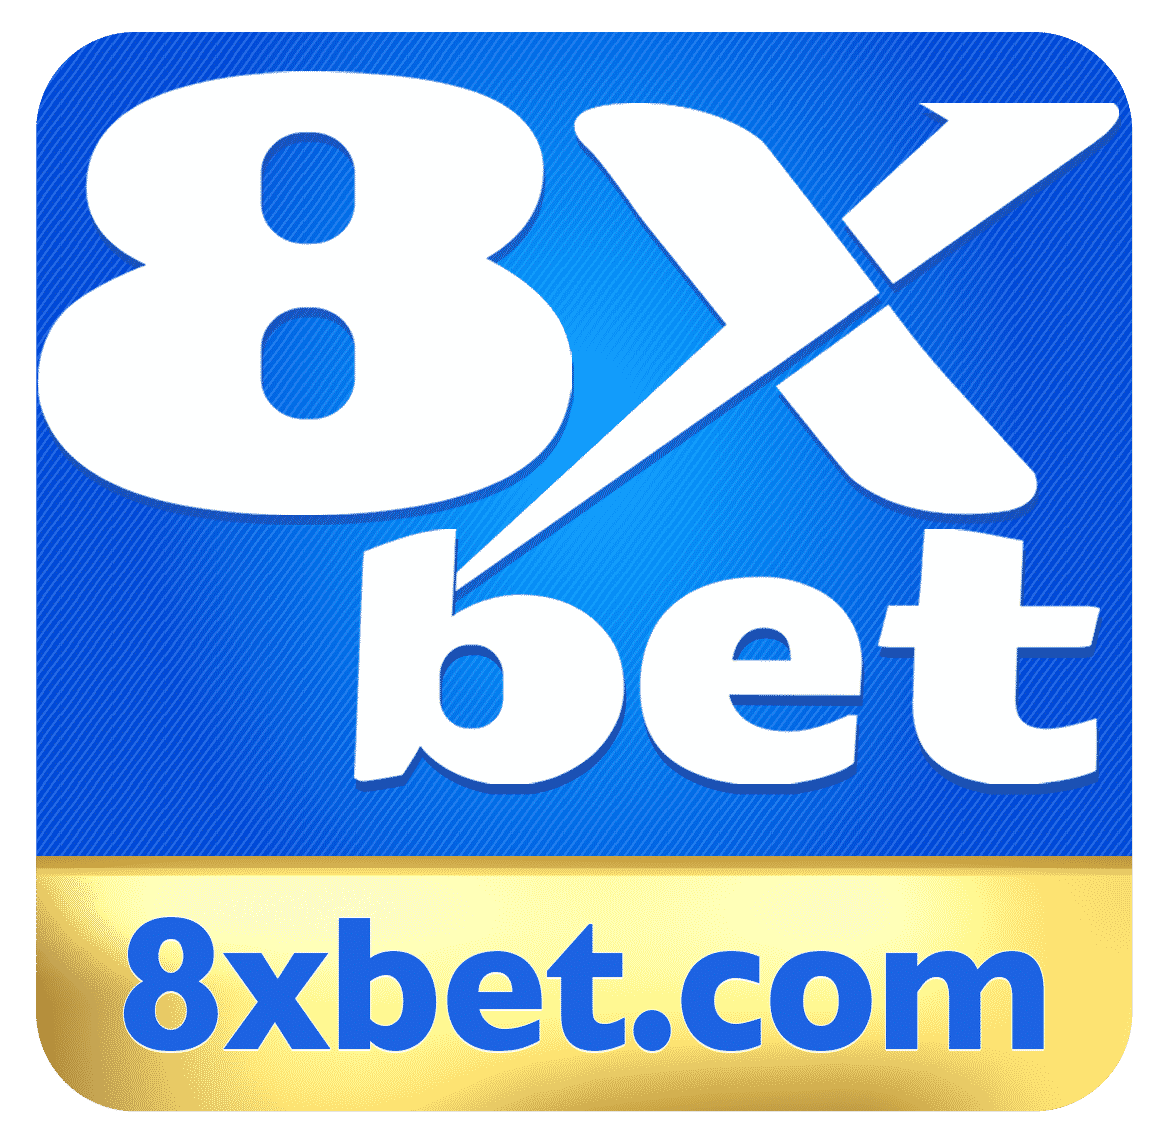 8X_BET_ICON_02 final-01